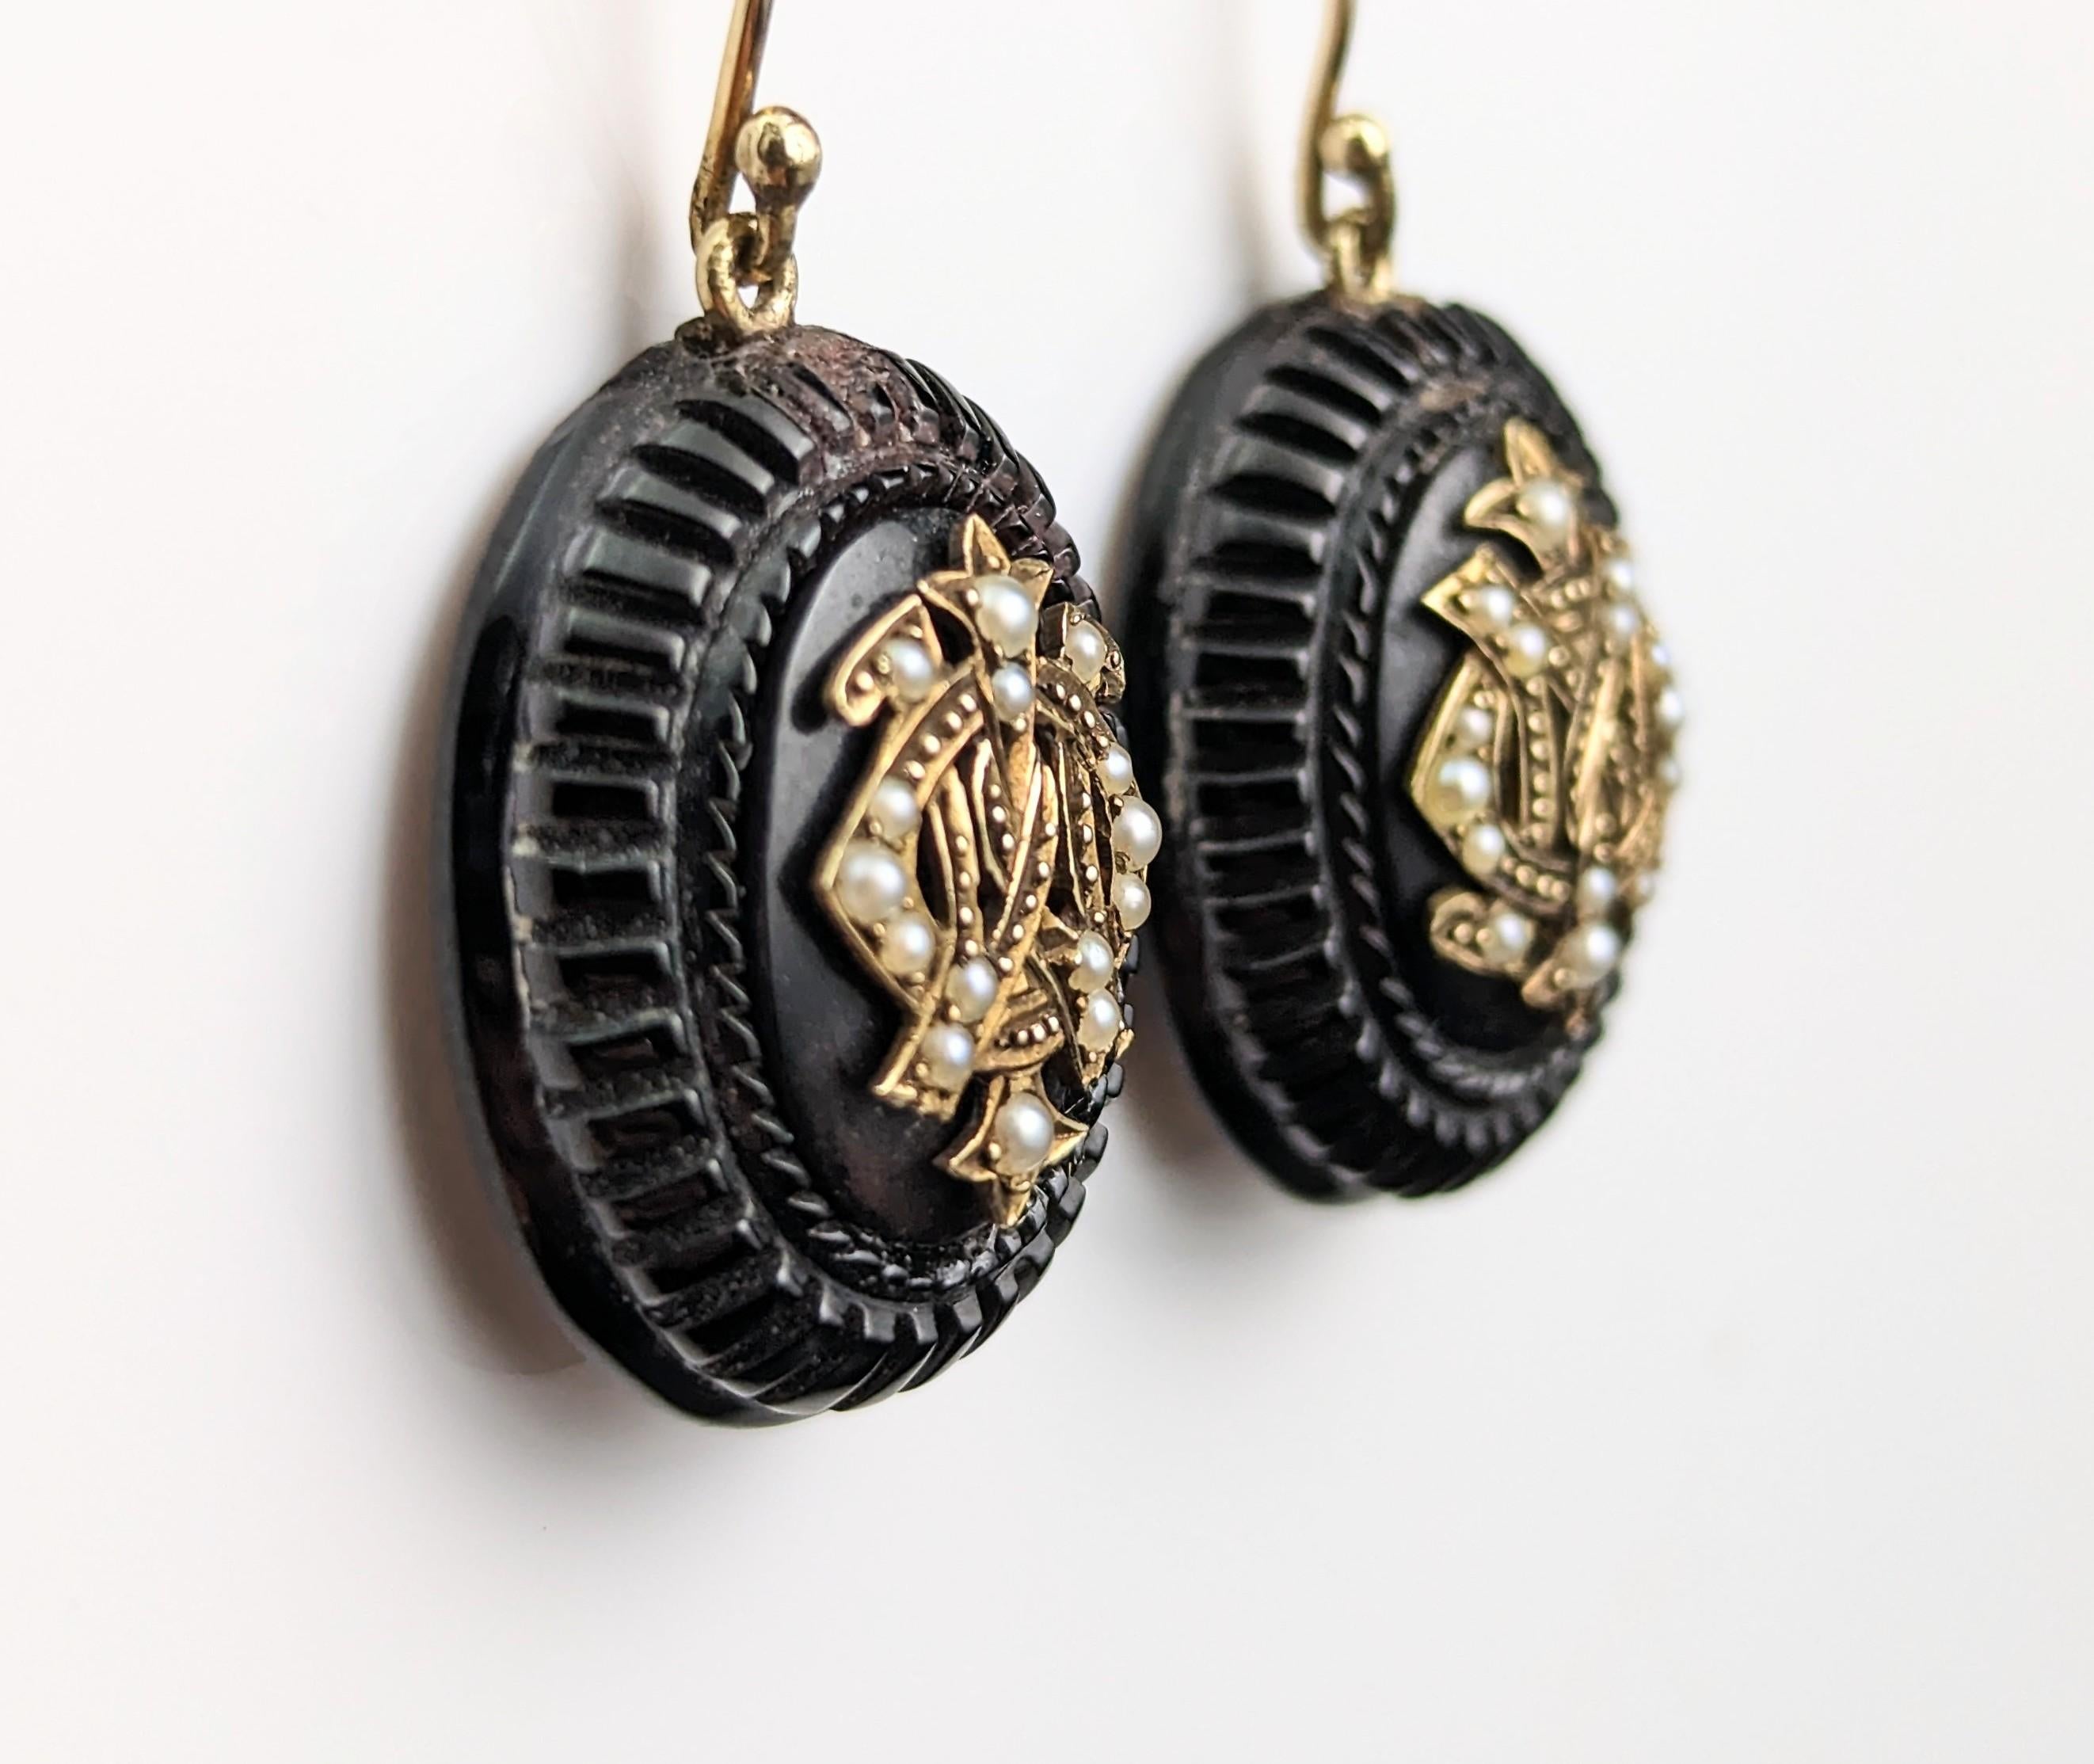 Antique Whitby Jet Mourning Earrings, 9k Gold and Seed Pearl, IMO 3